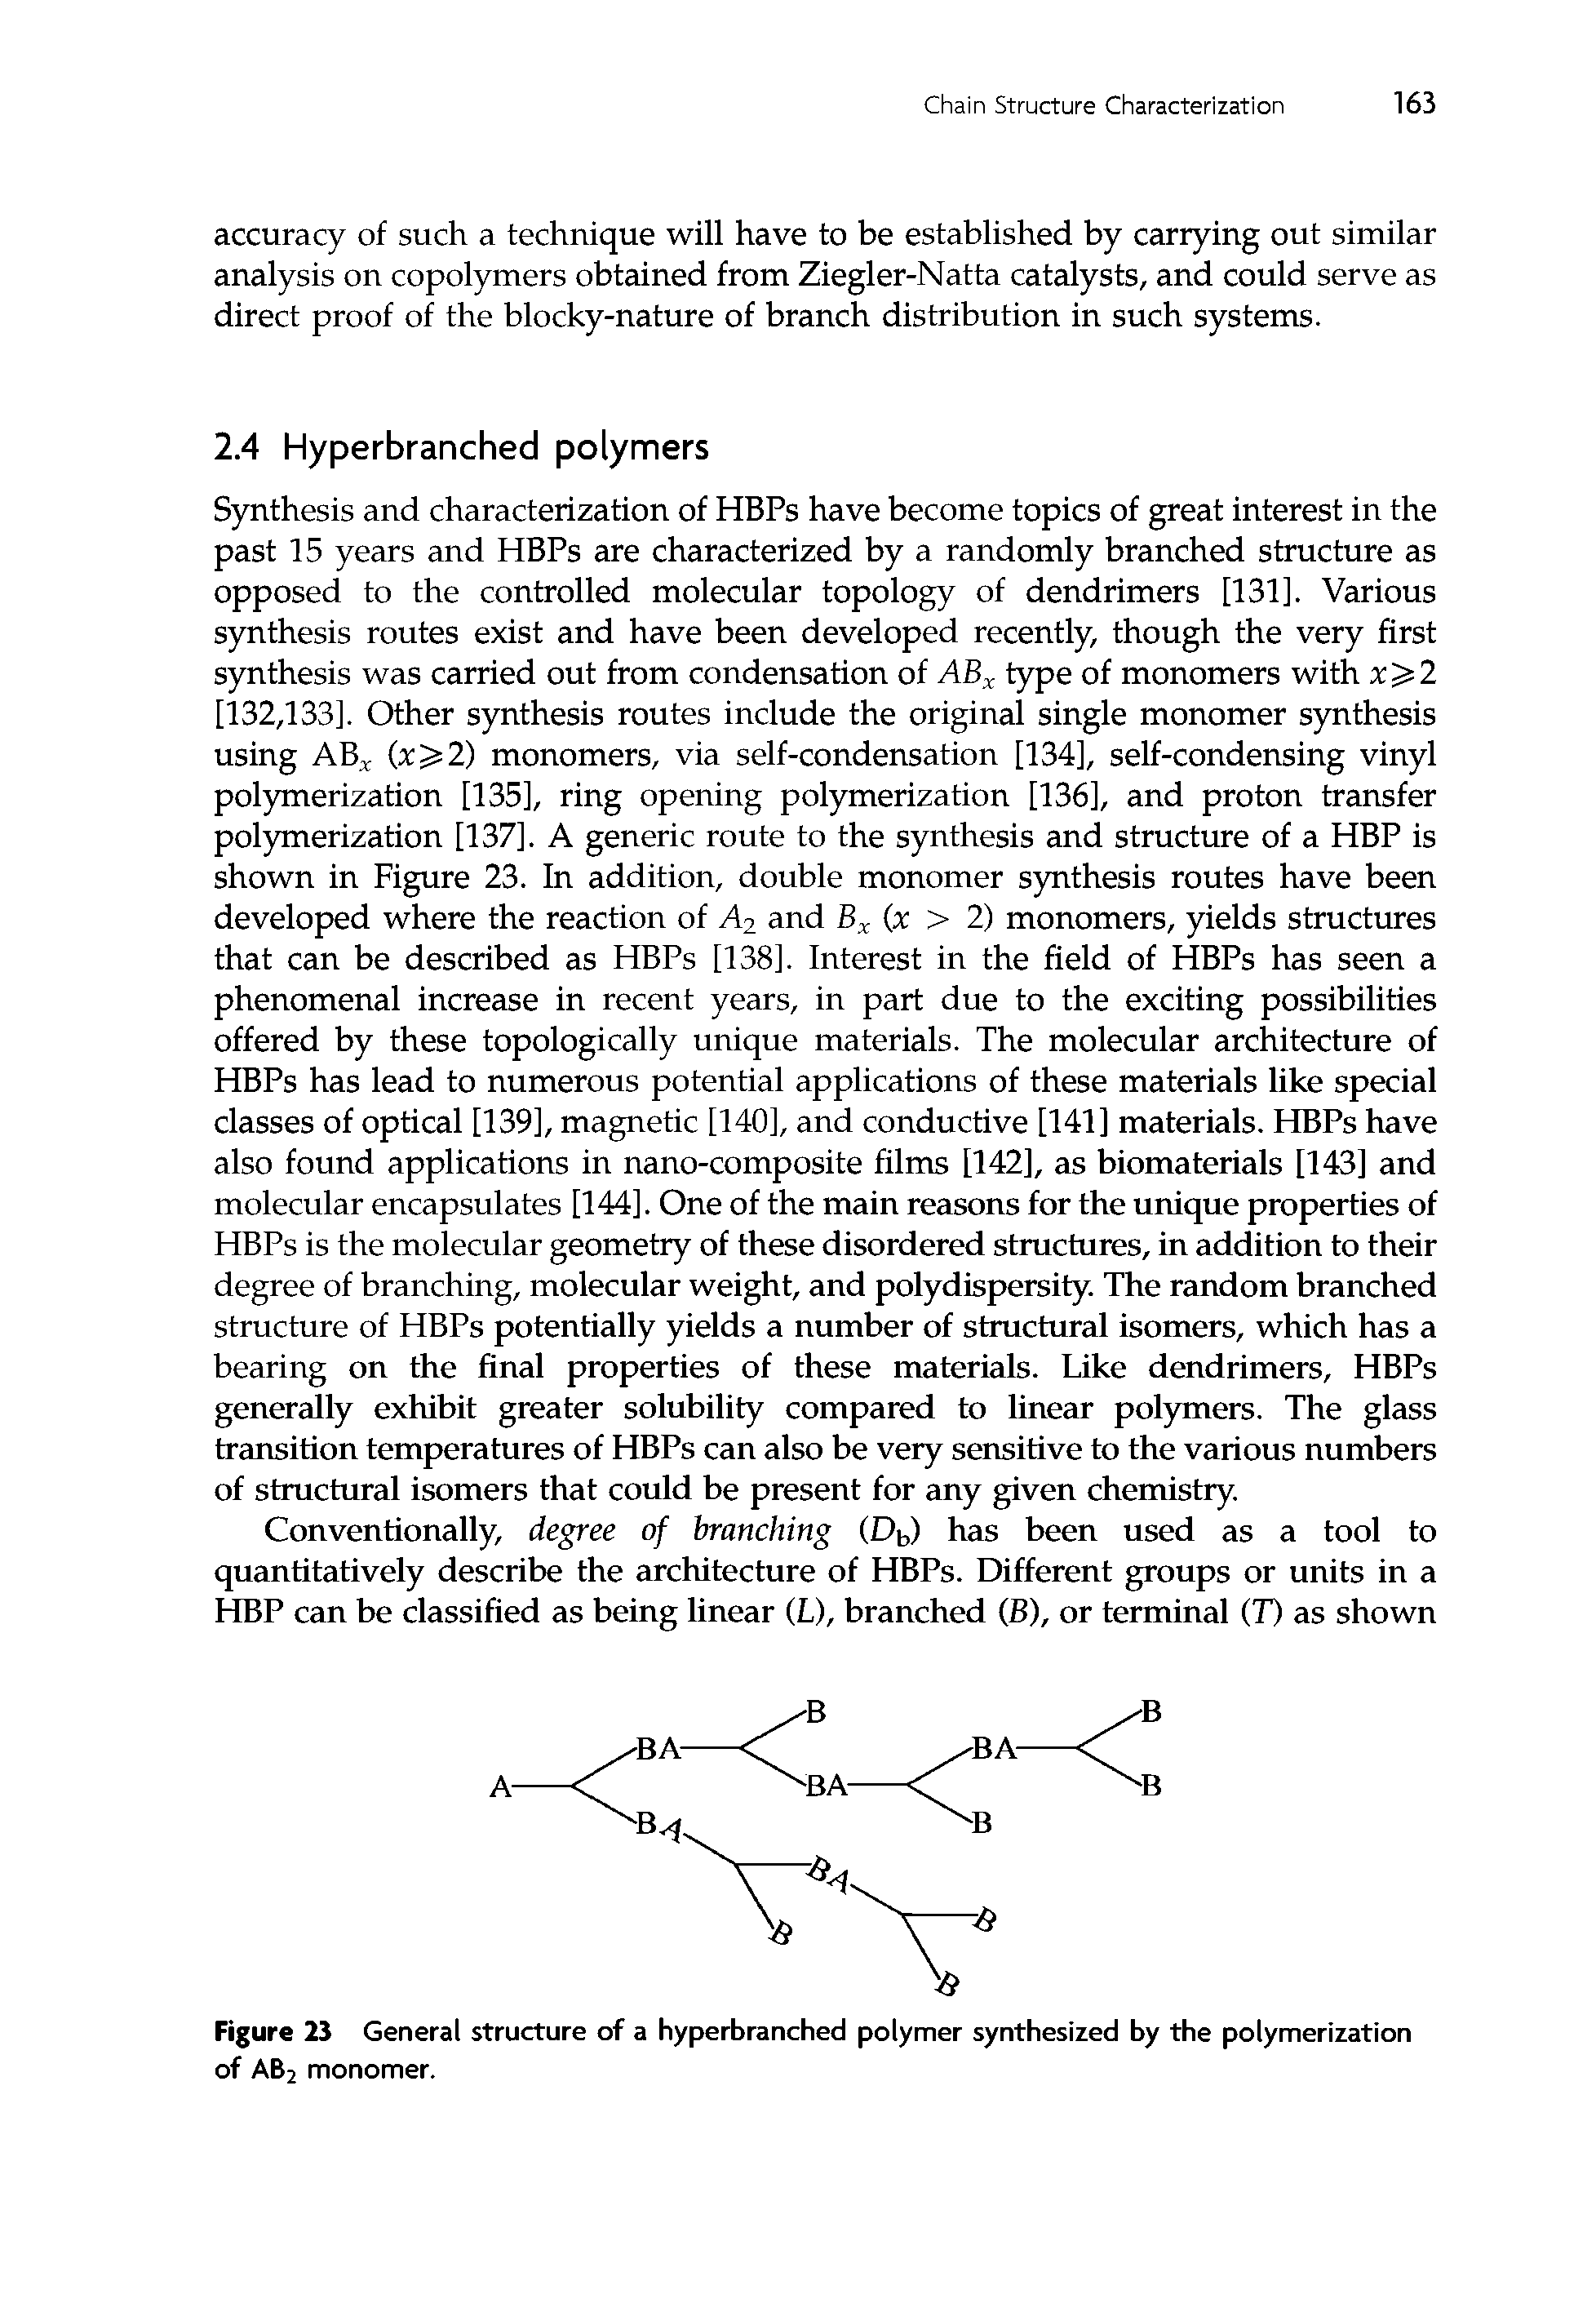 Figure 23 General structure of a hyperbranched polymer synthesized by the polymerization of AB2 monomer.